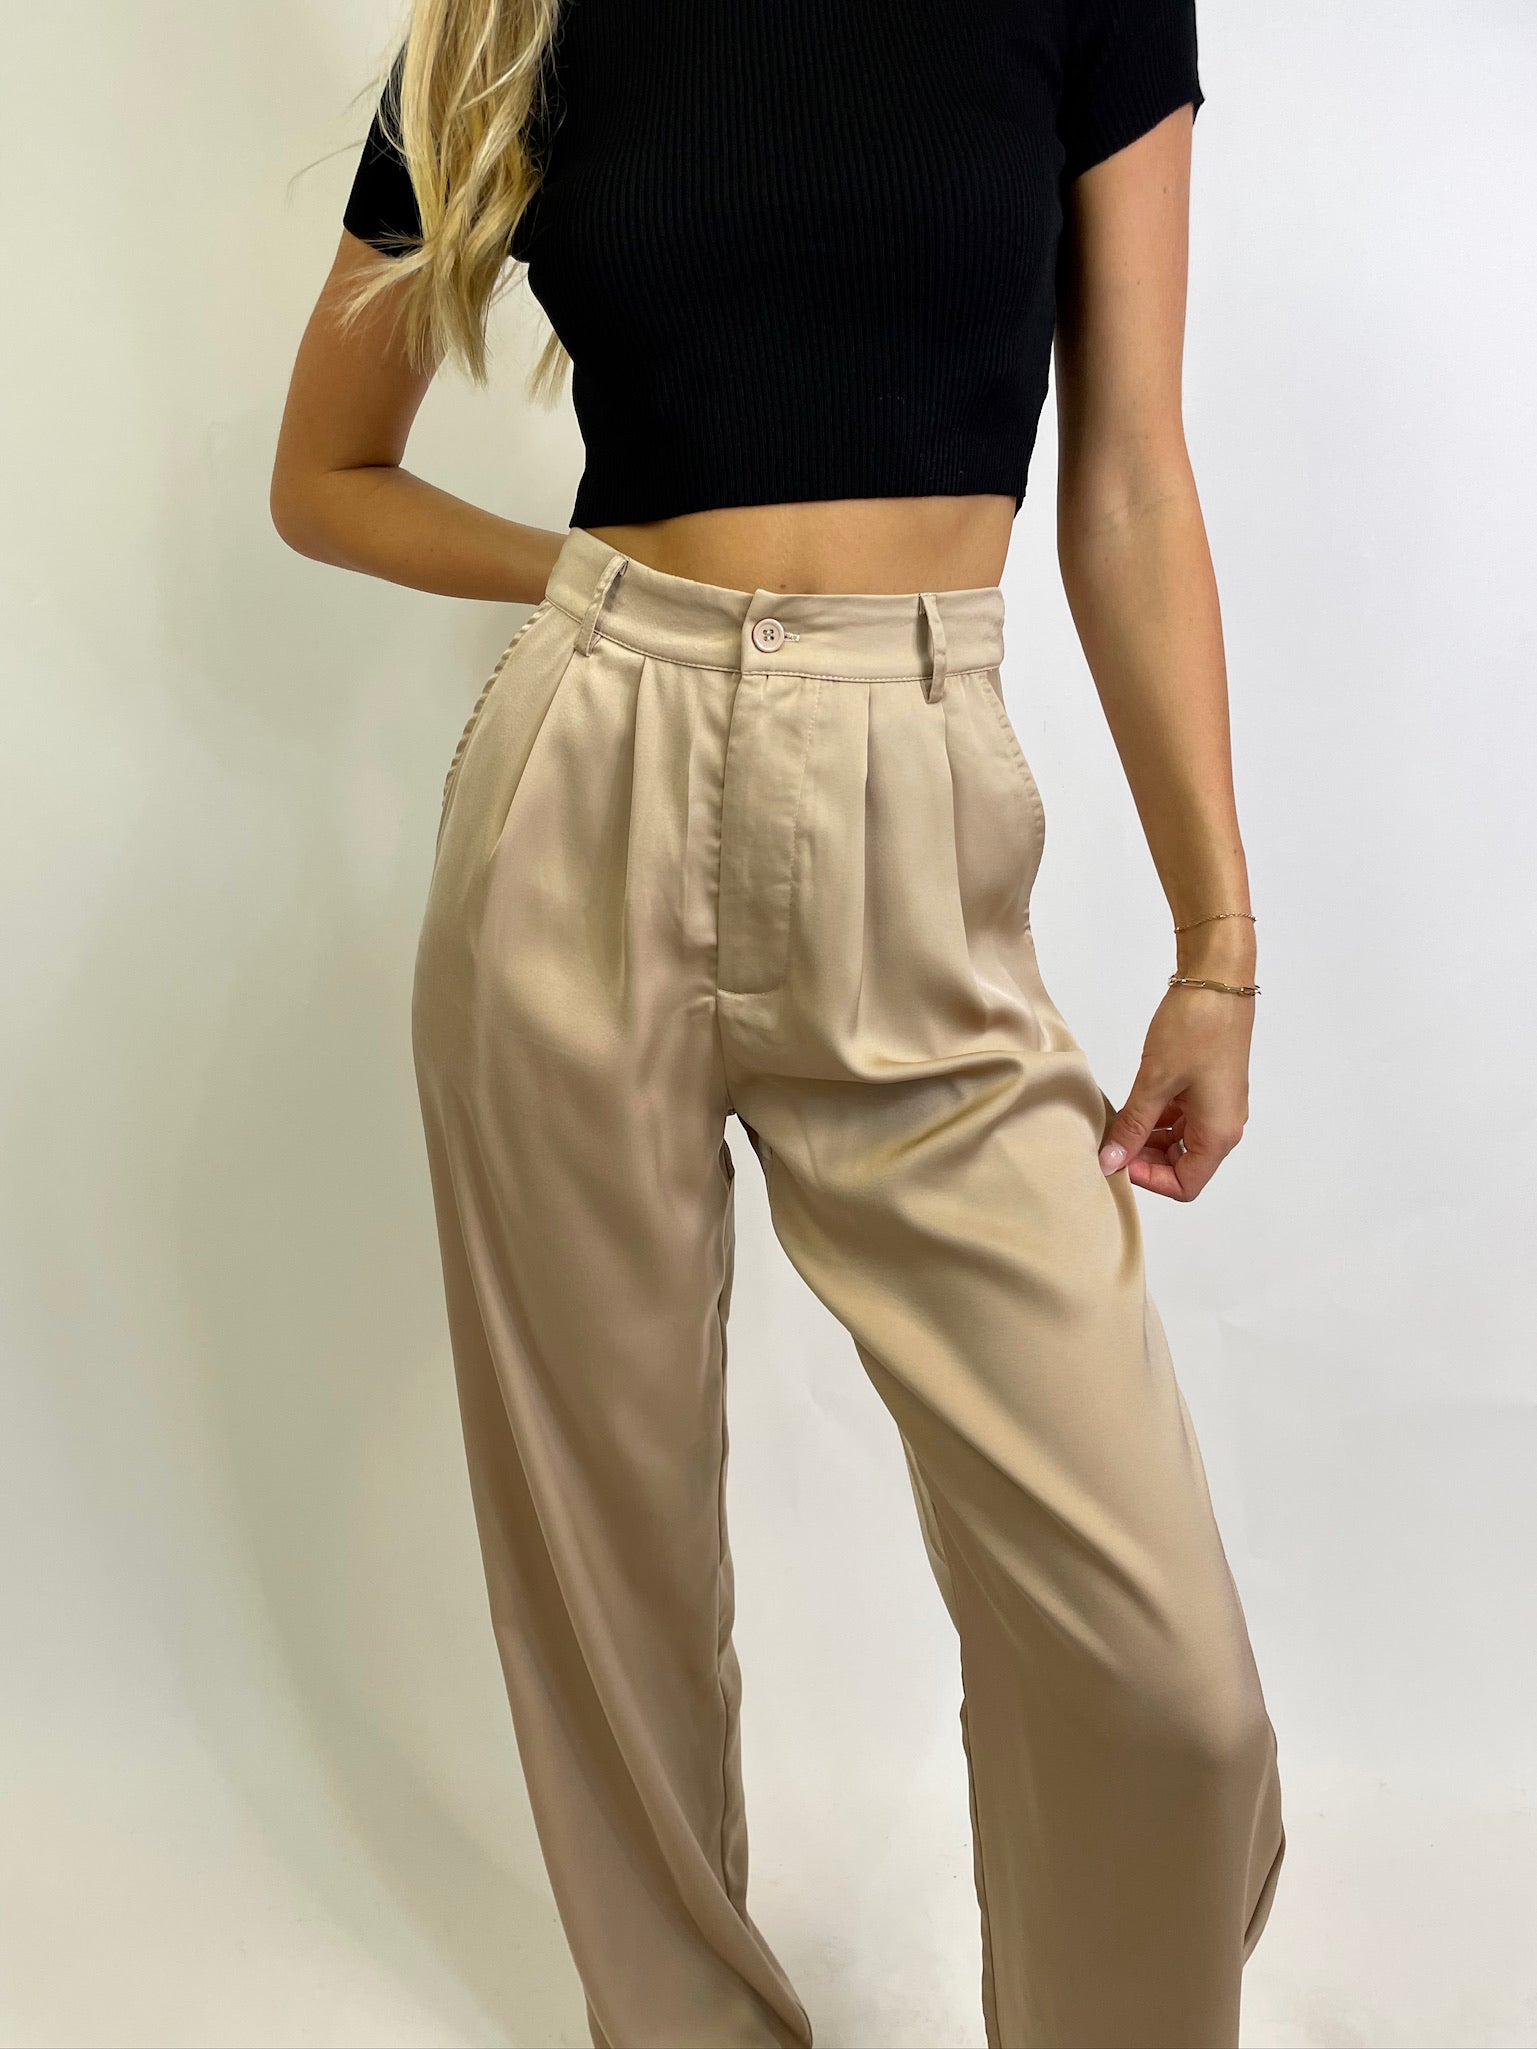 THE SAY SO TROUSER